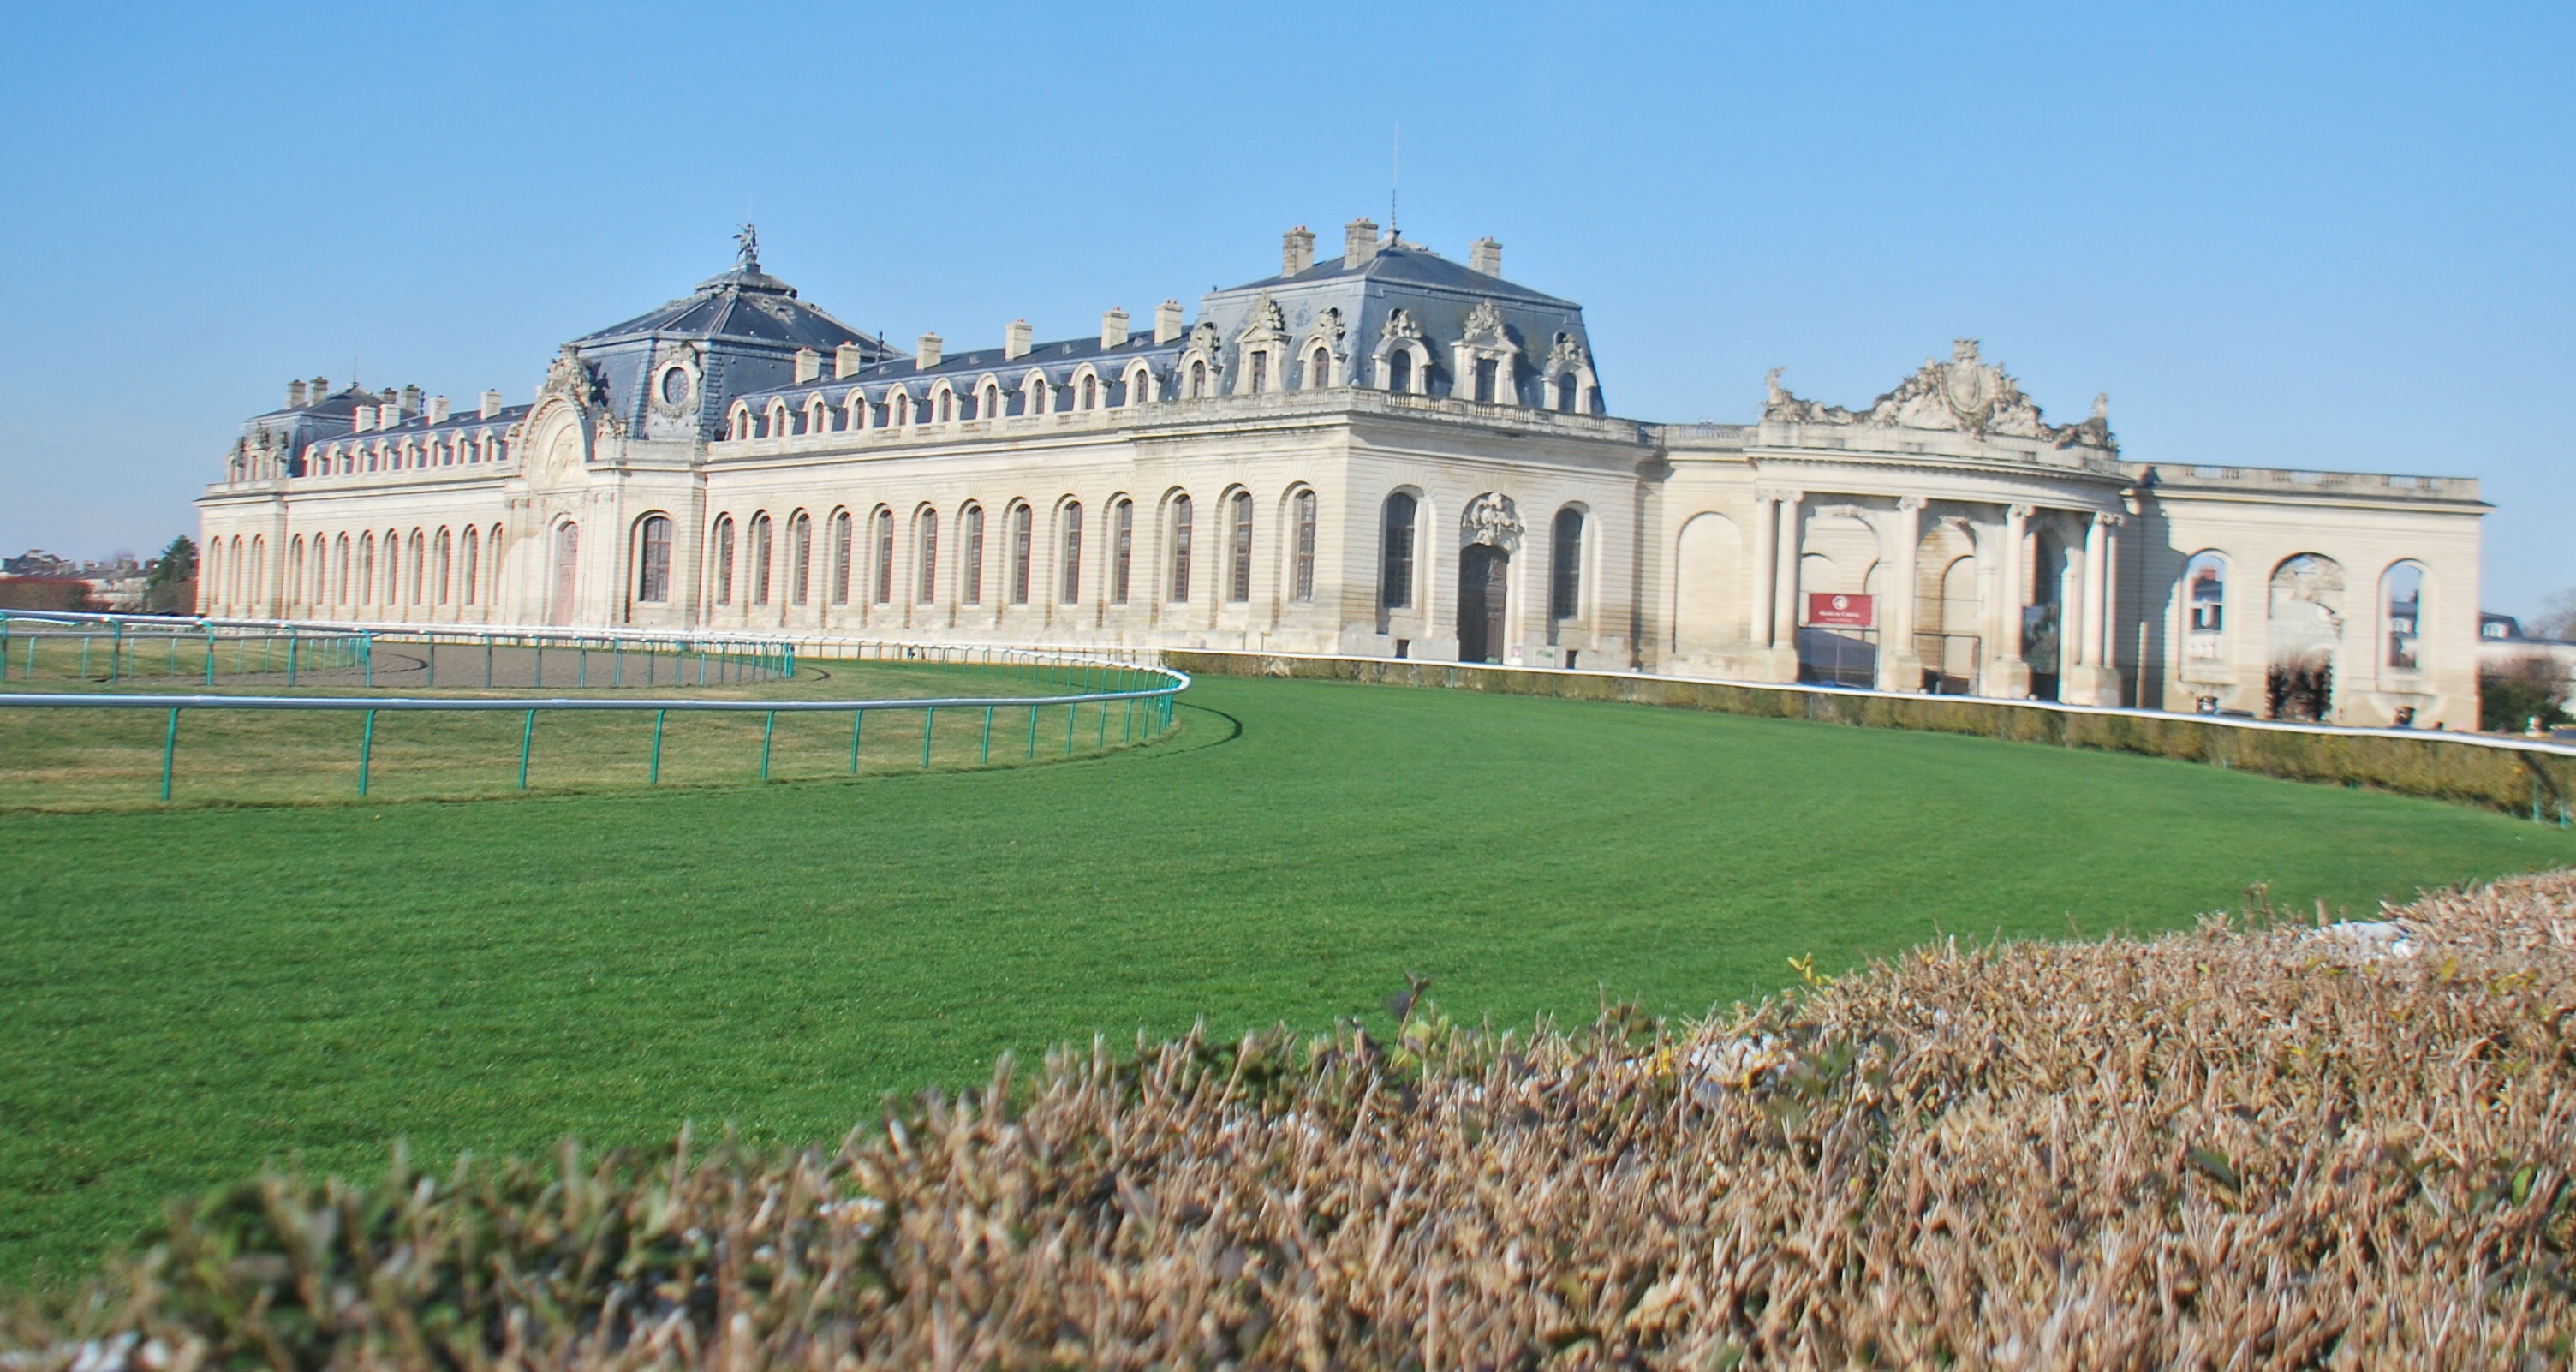 The magnificent Grandes Ecuries, formerly housing the Duc d’Aumale’s stables, sit alongside the racecourse. Photo: John Gilmore